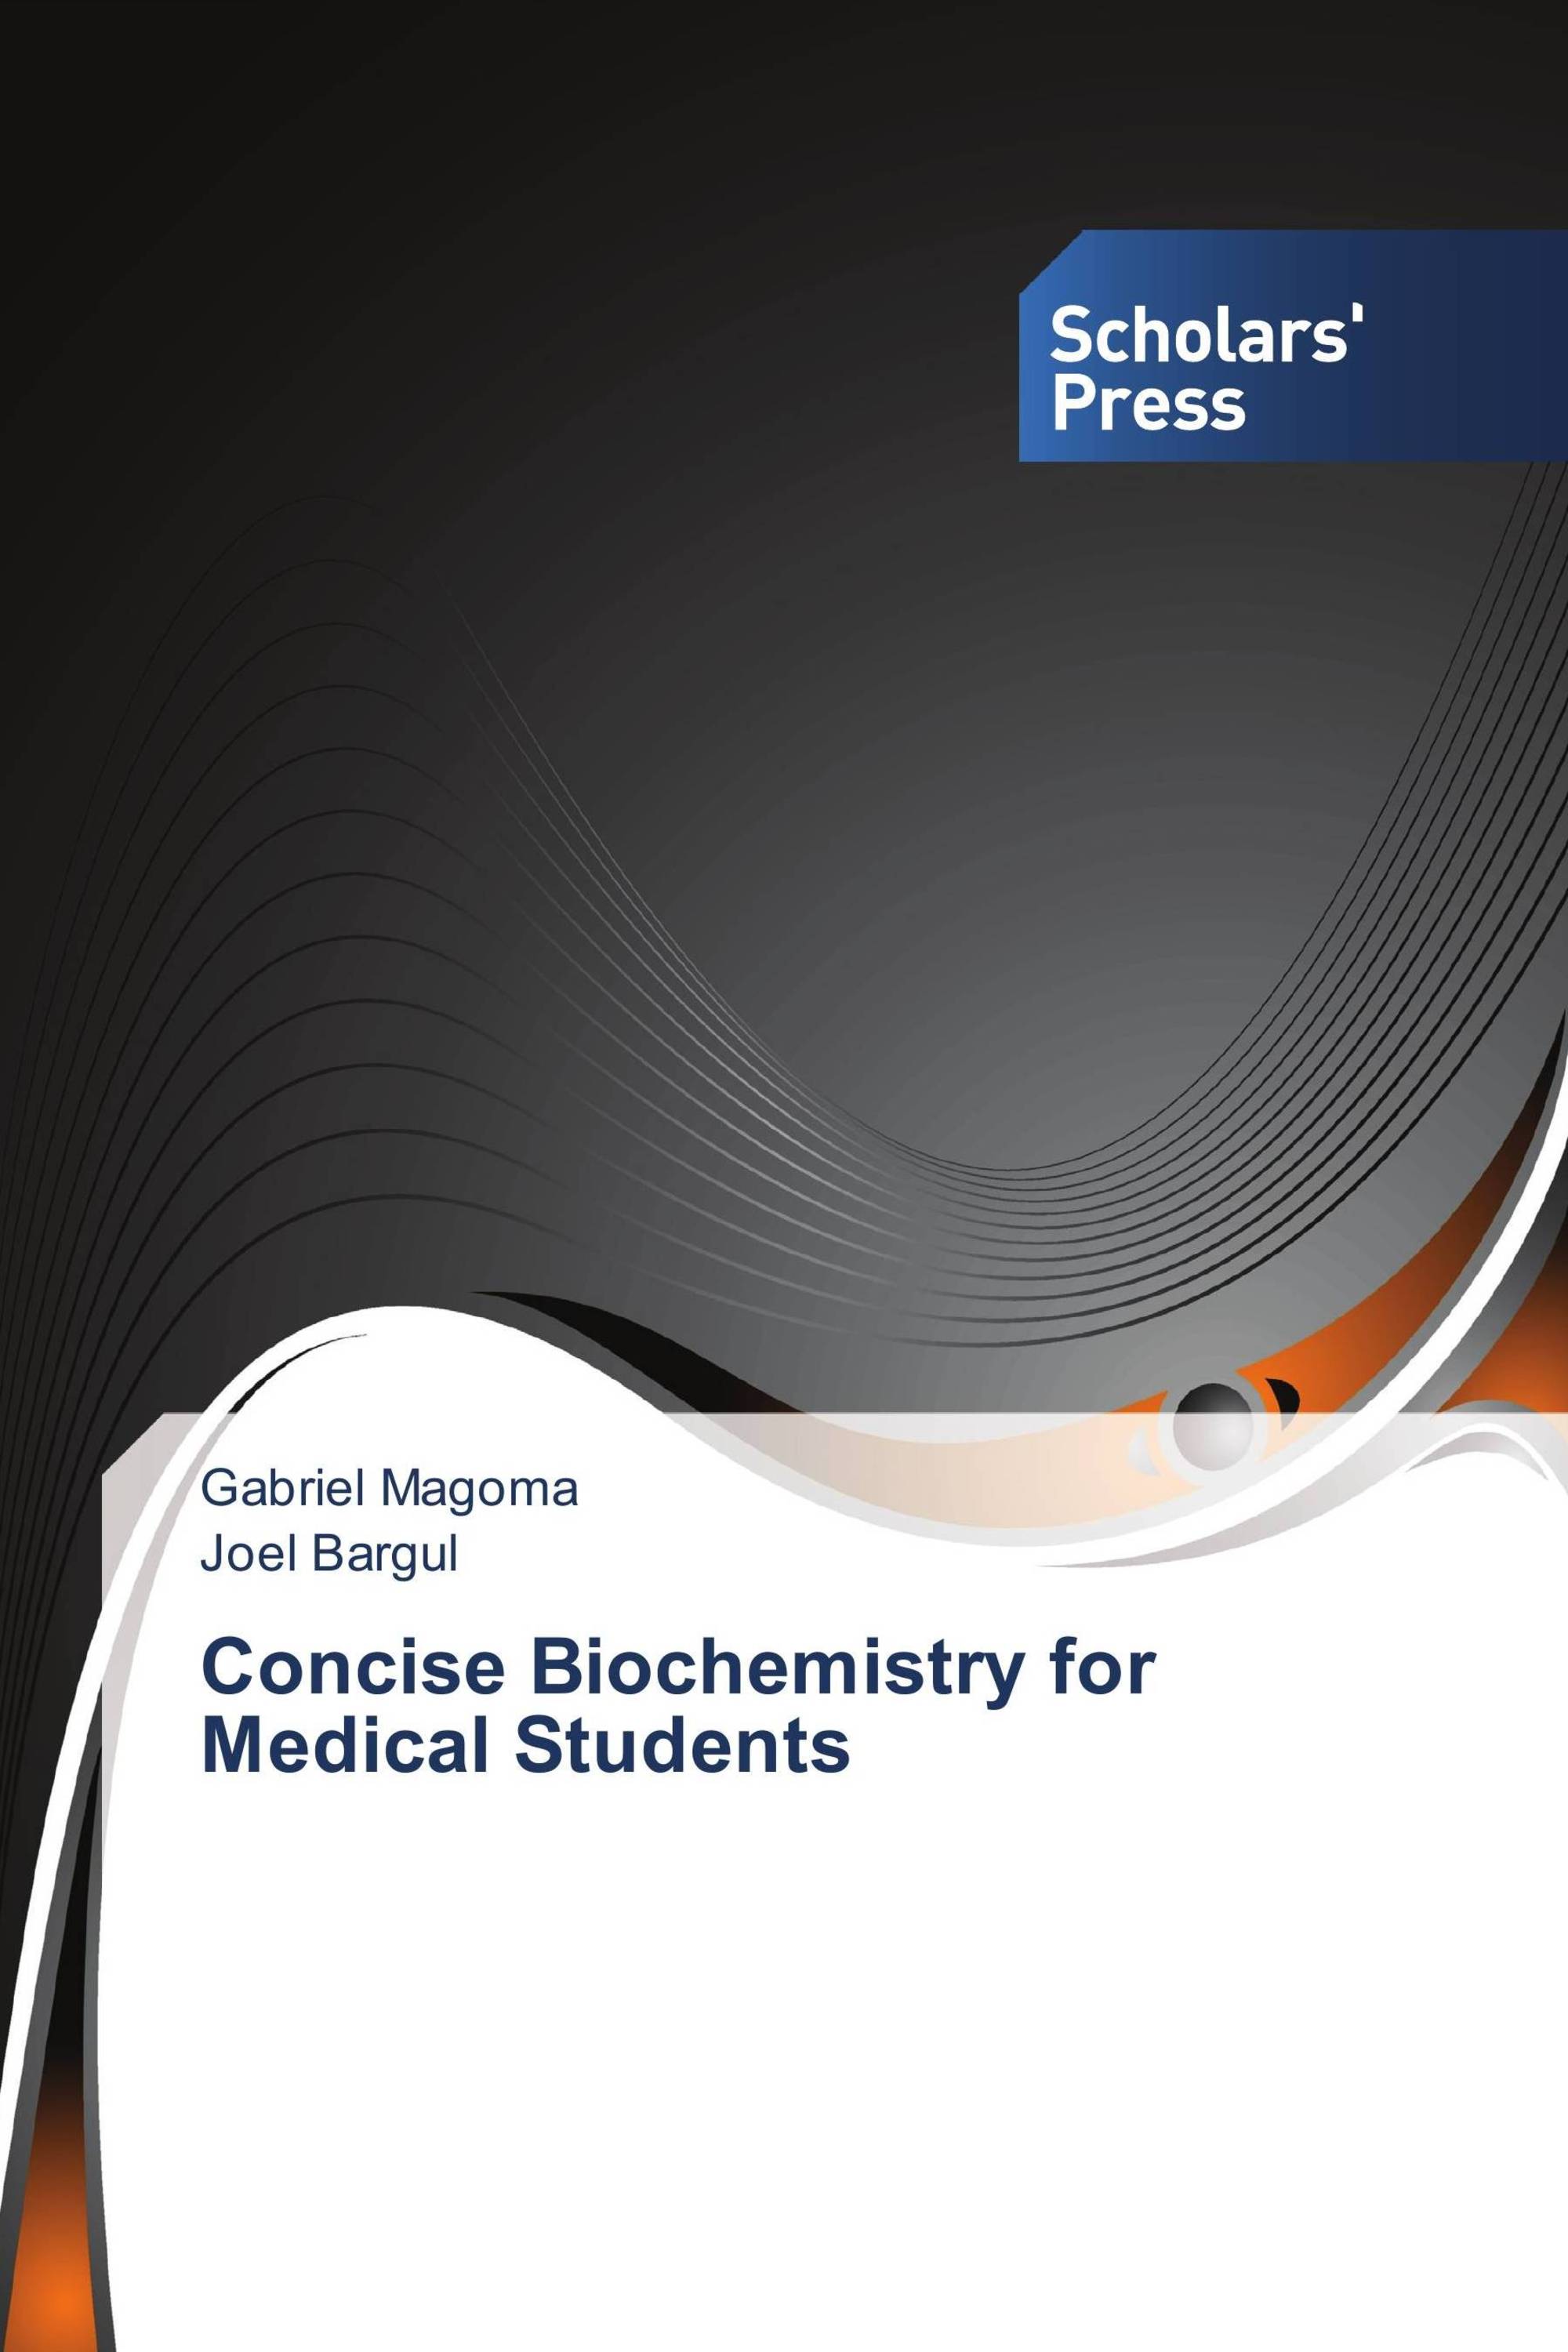 Concise Biochemistry for Medical Students